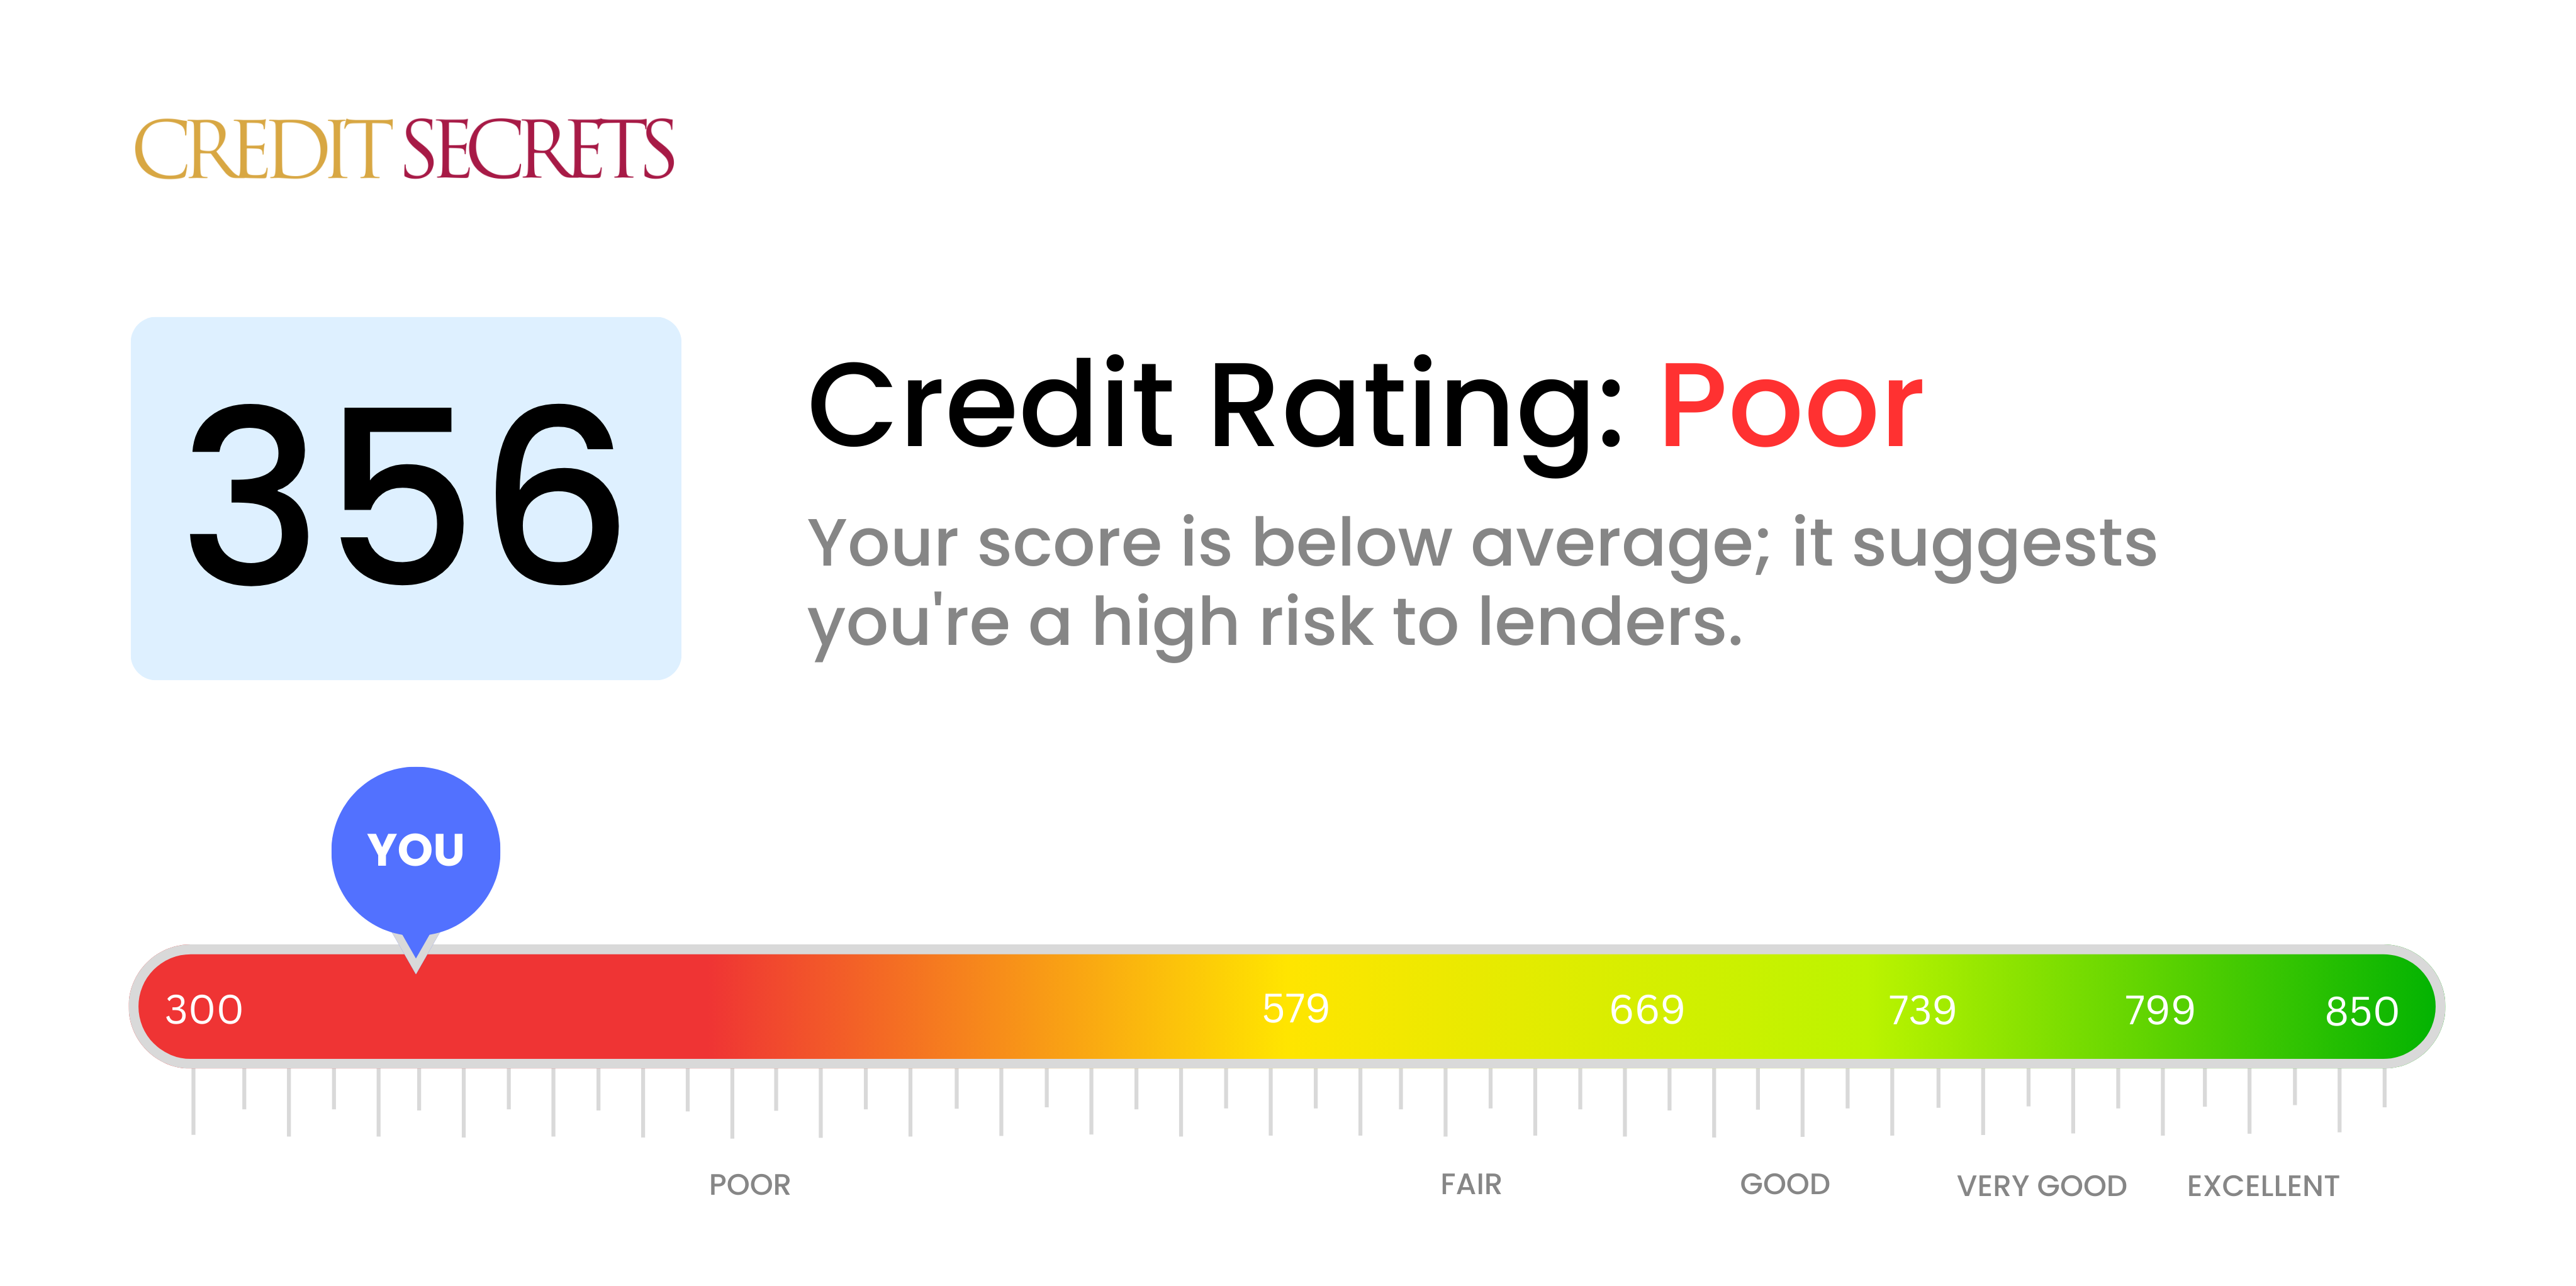 Is 356 a good credit score?